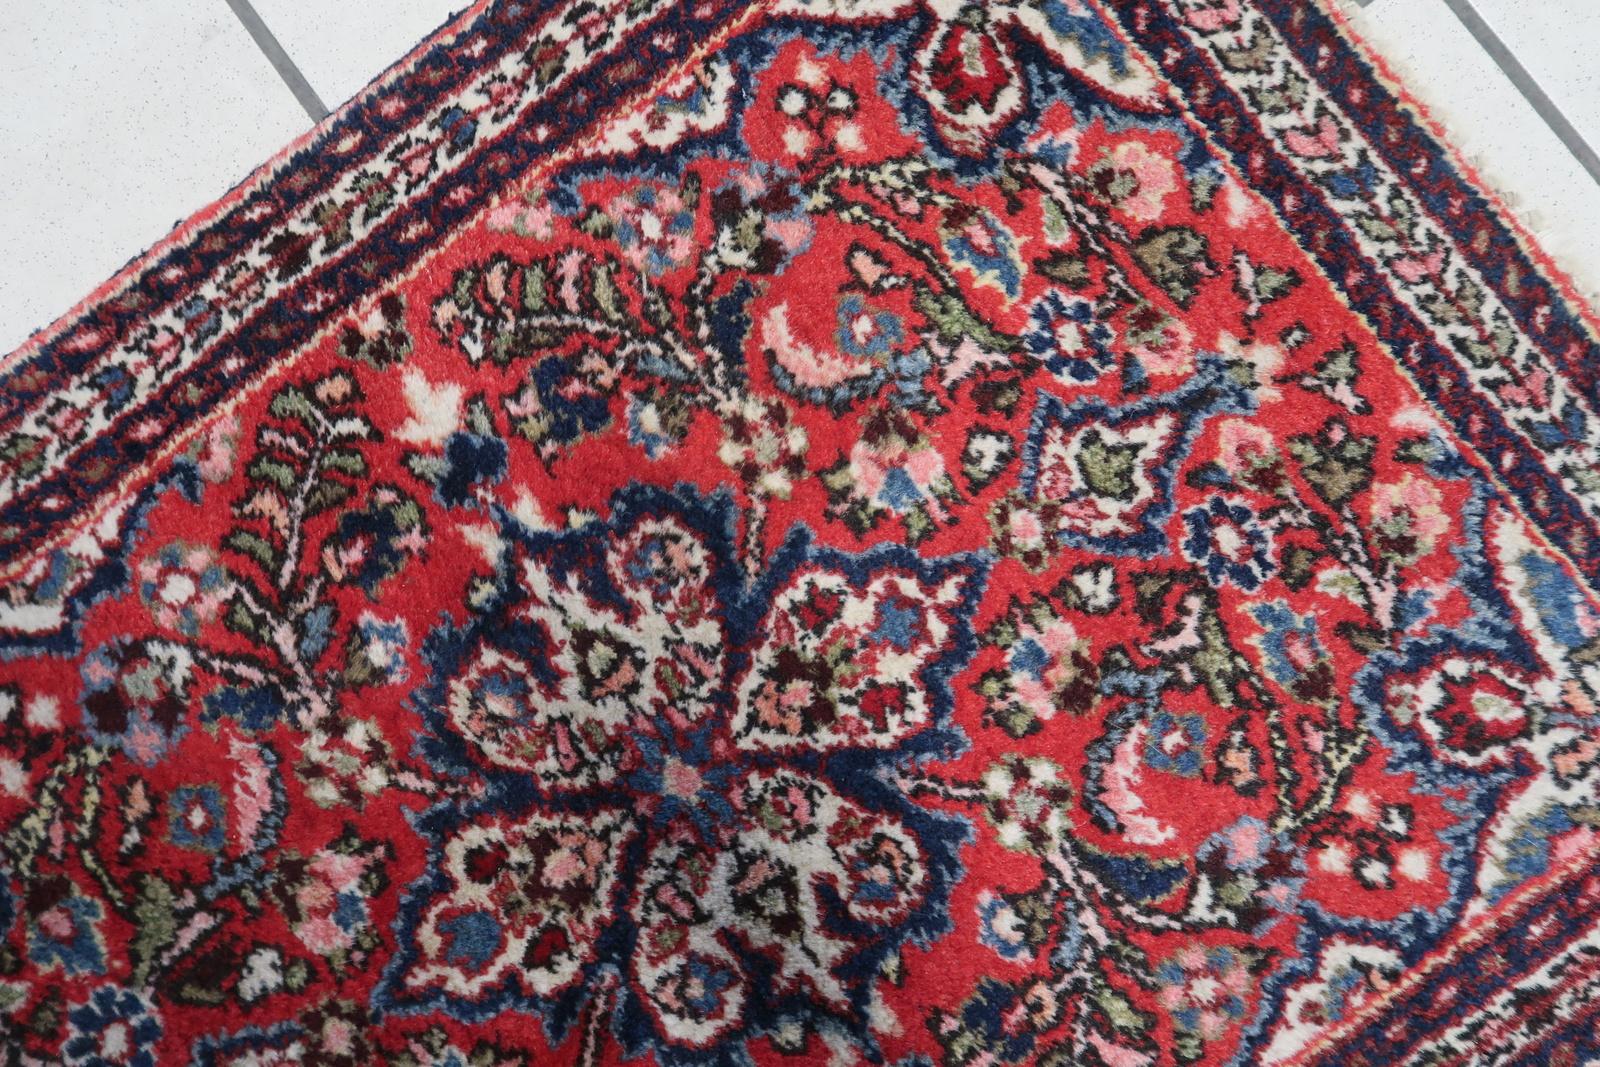 Hand-Knotted Handmade Vintage Persian Style Sarouk Rugб 1960s - 1C1075 For Sale